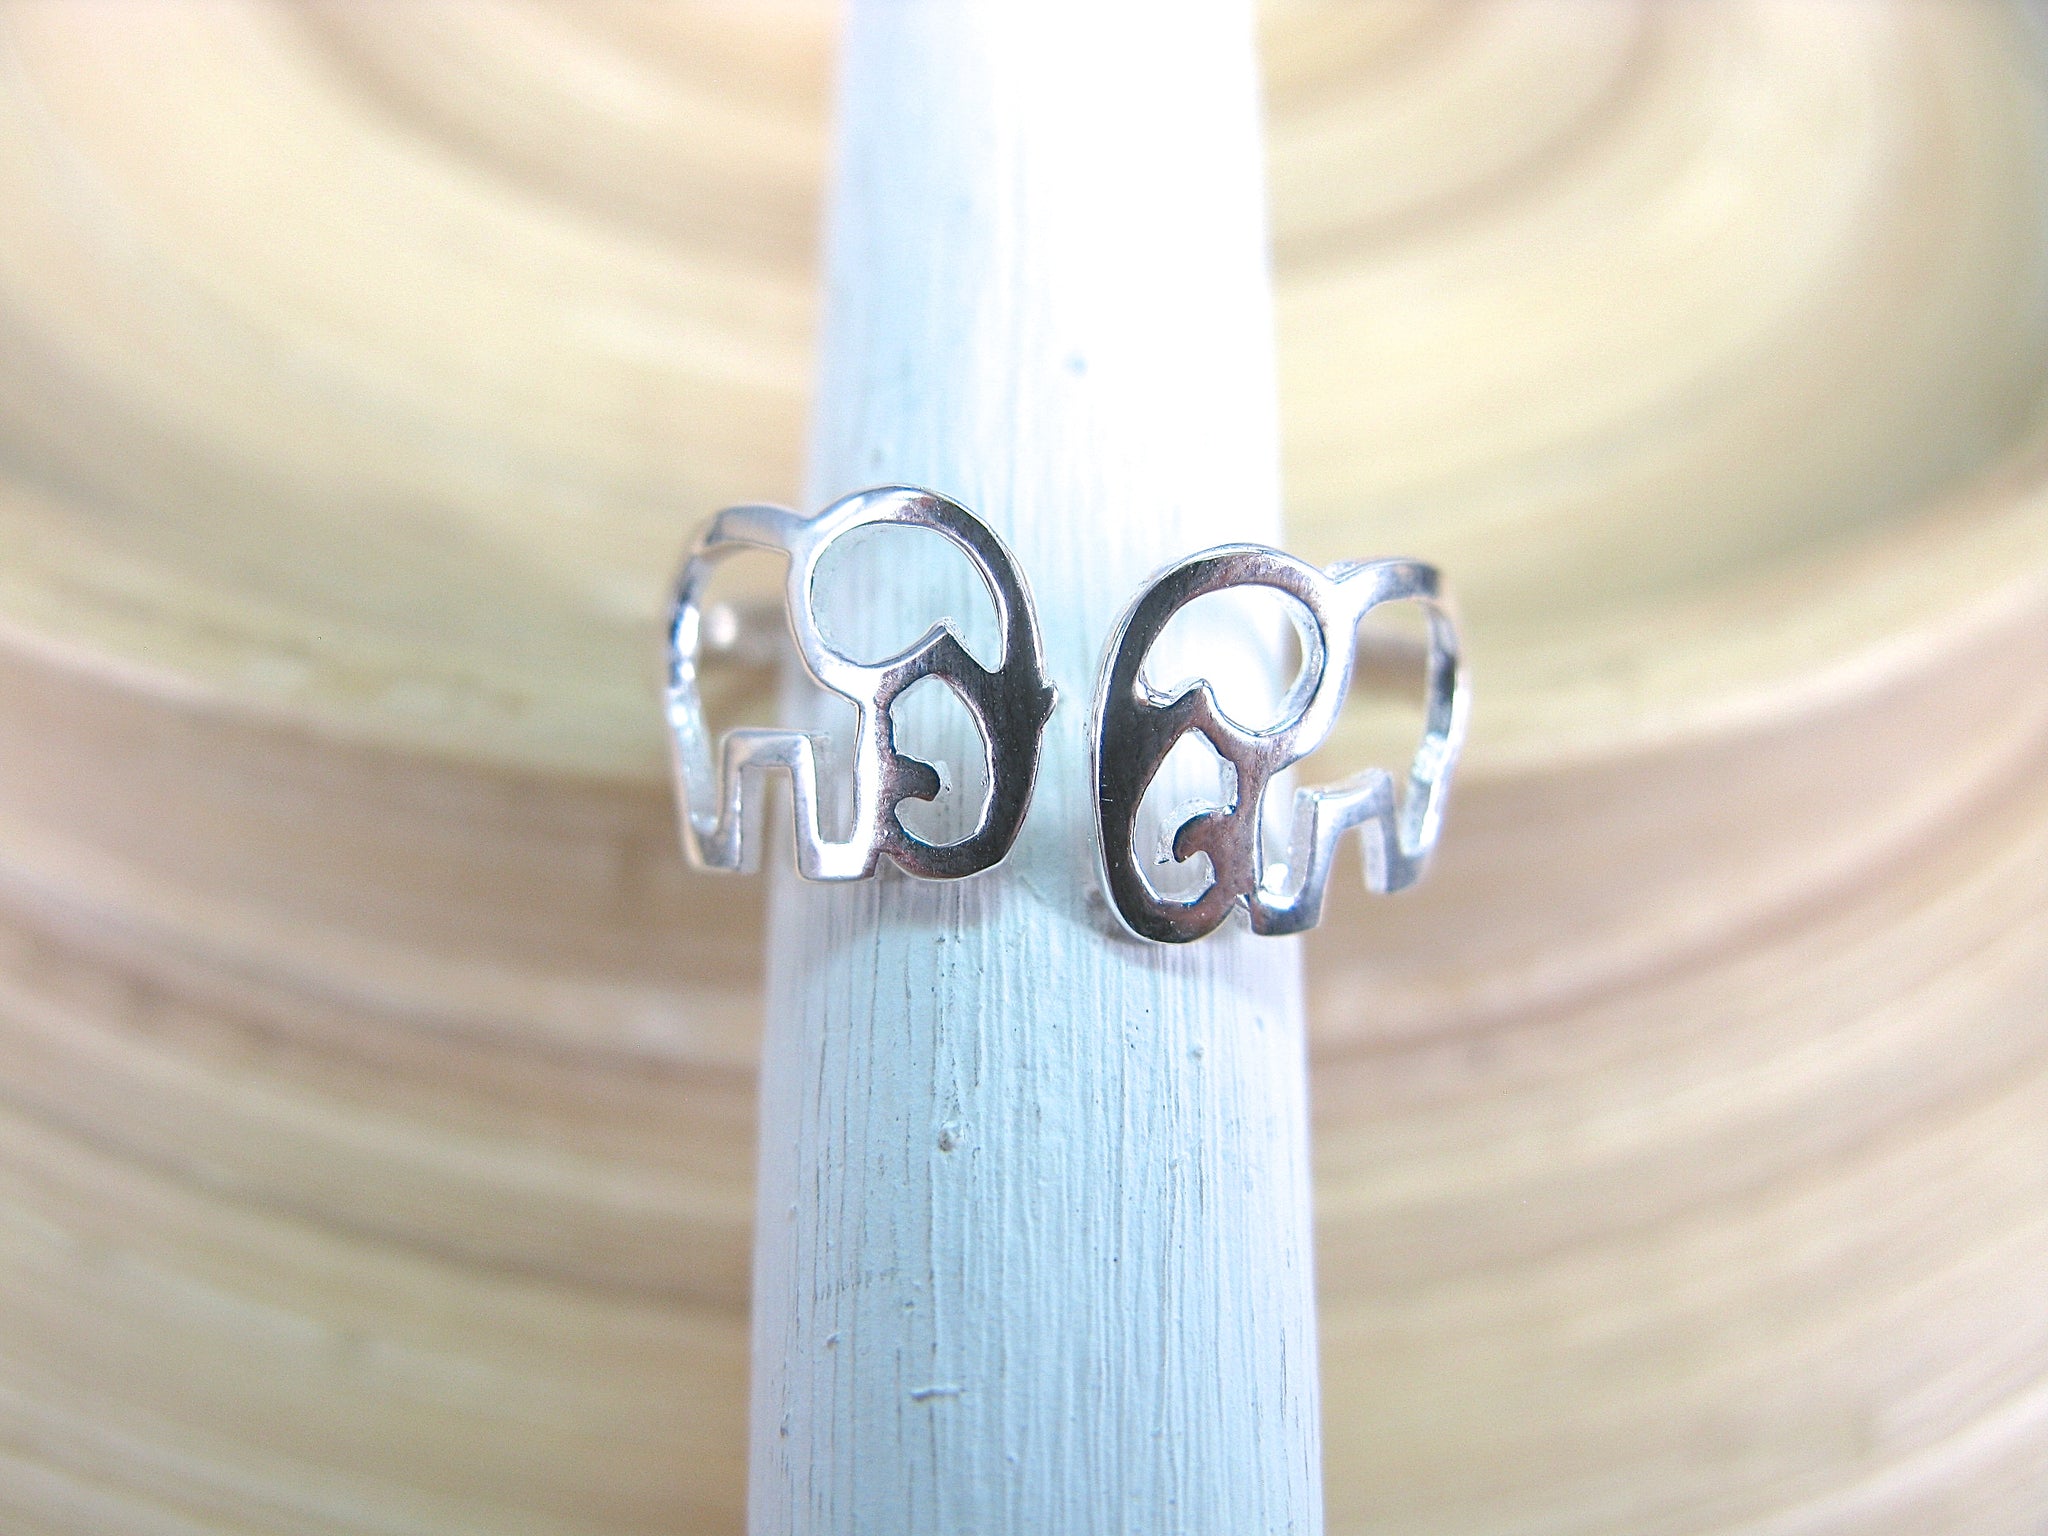 Elephant Filigree Ring in 925 Sterling Silver